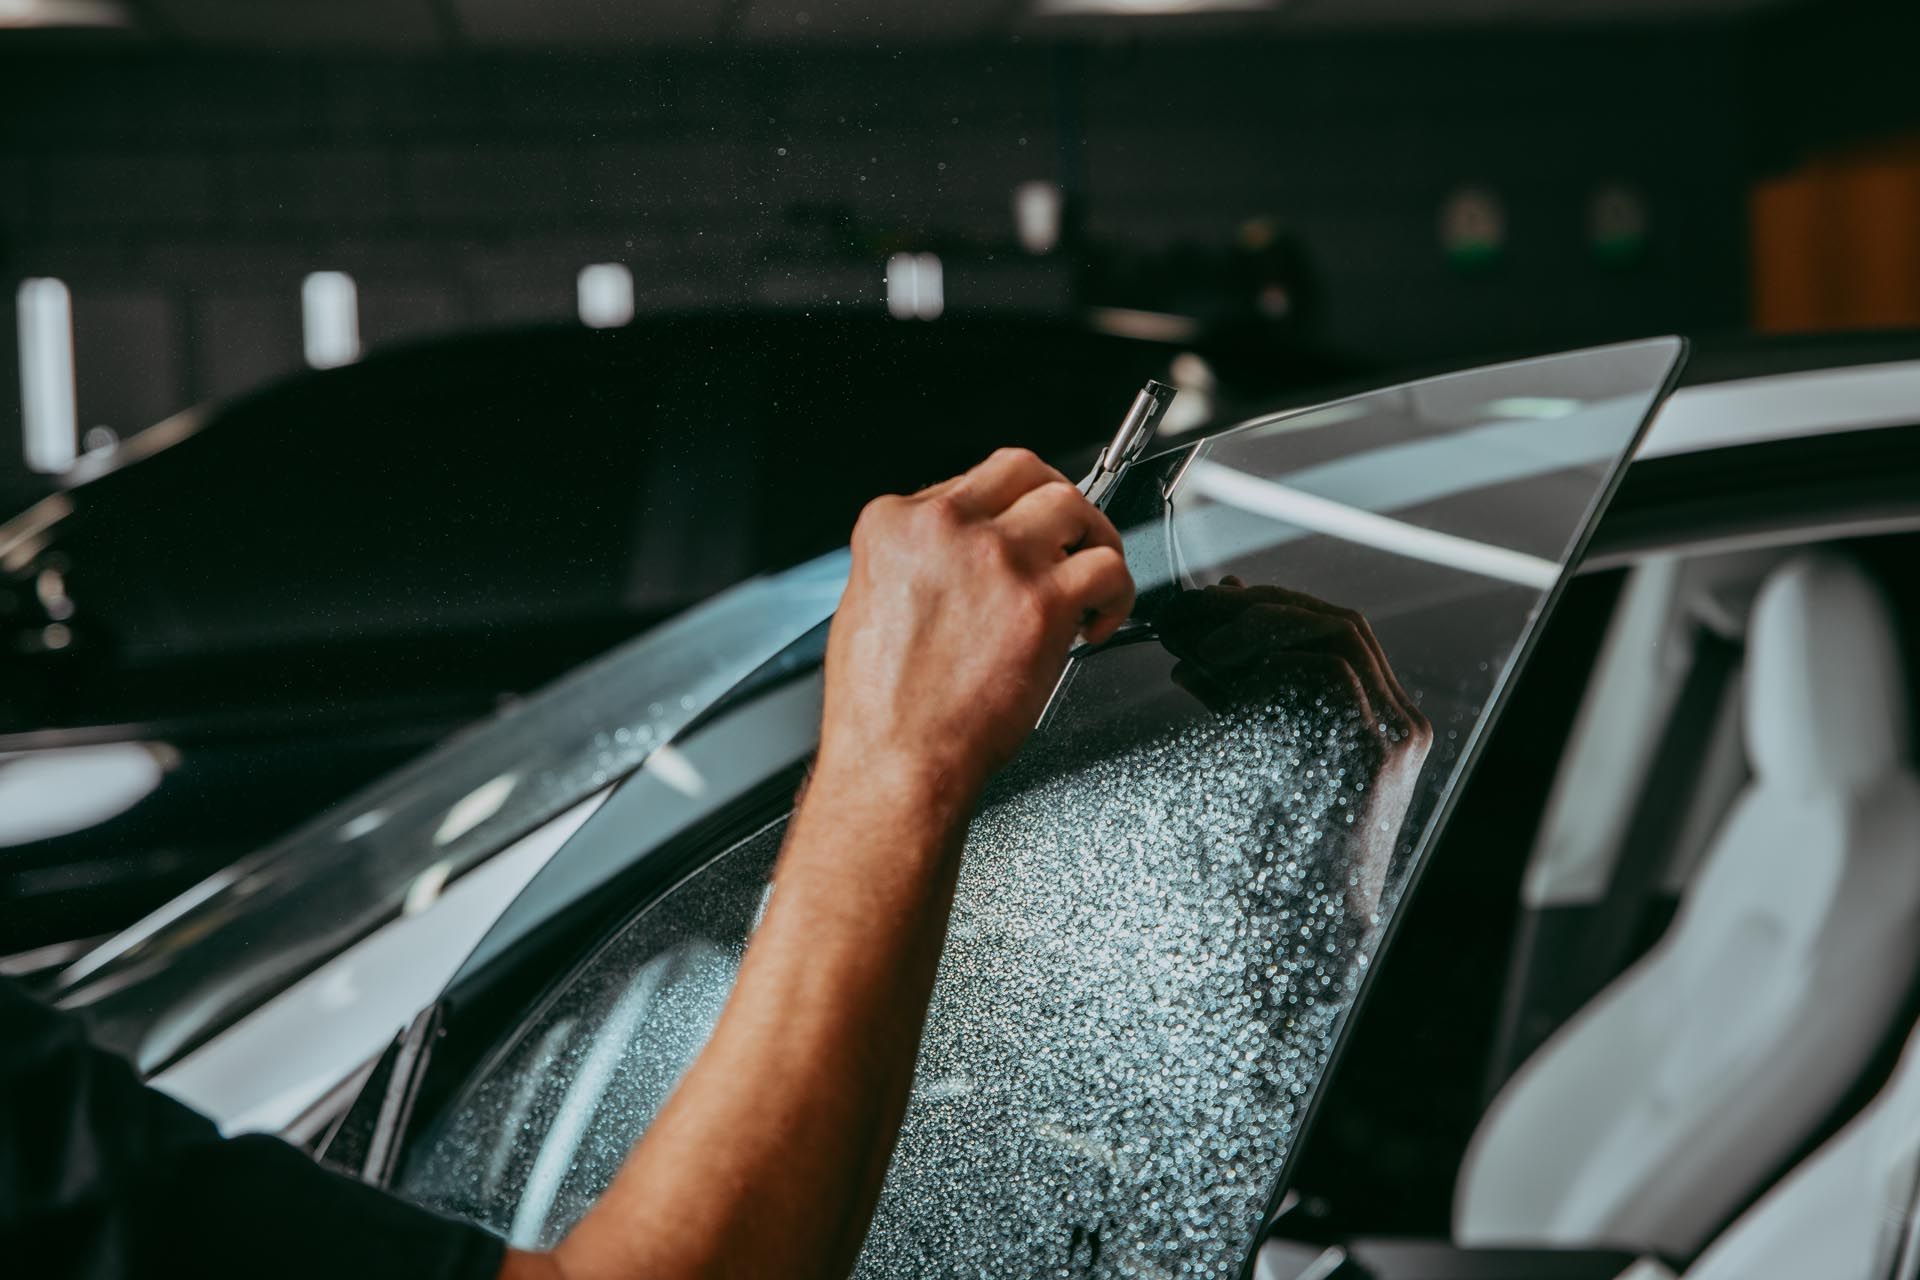 Window Tint - A person is applying tinted glass to a car window